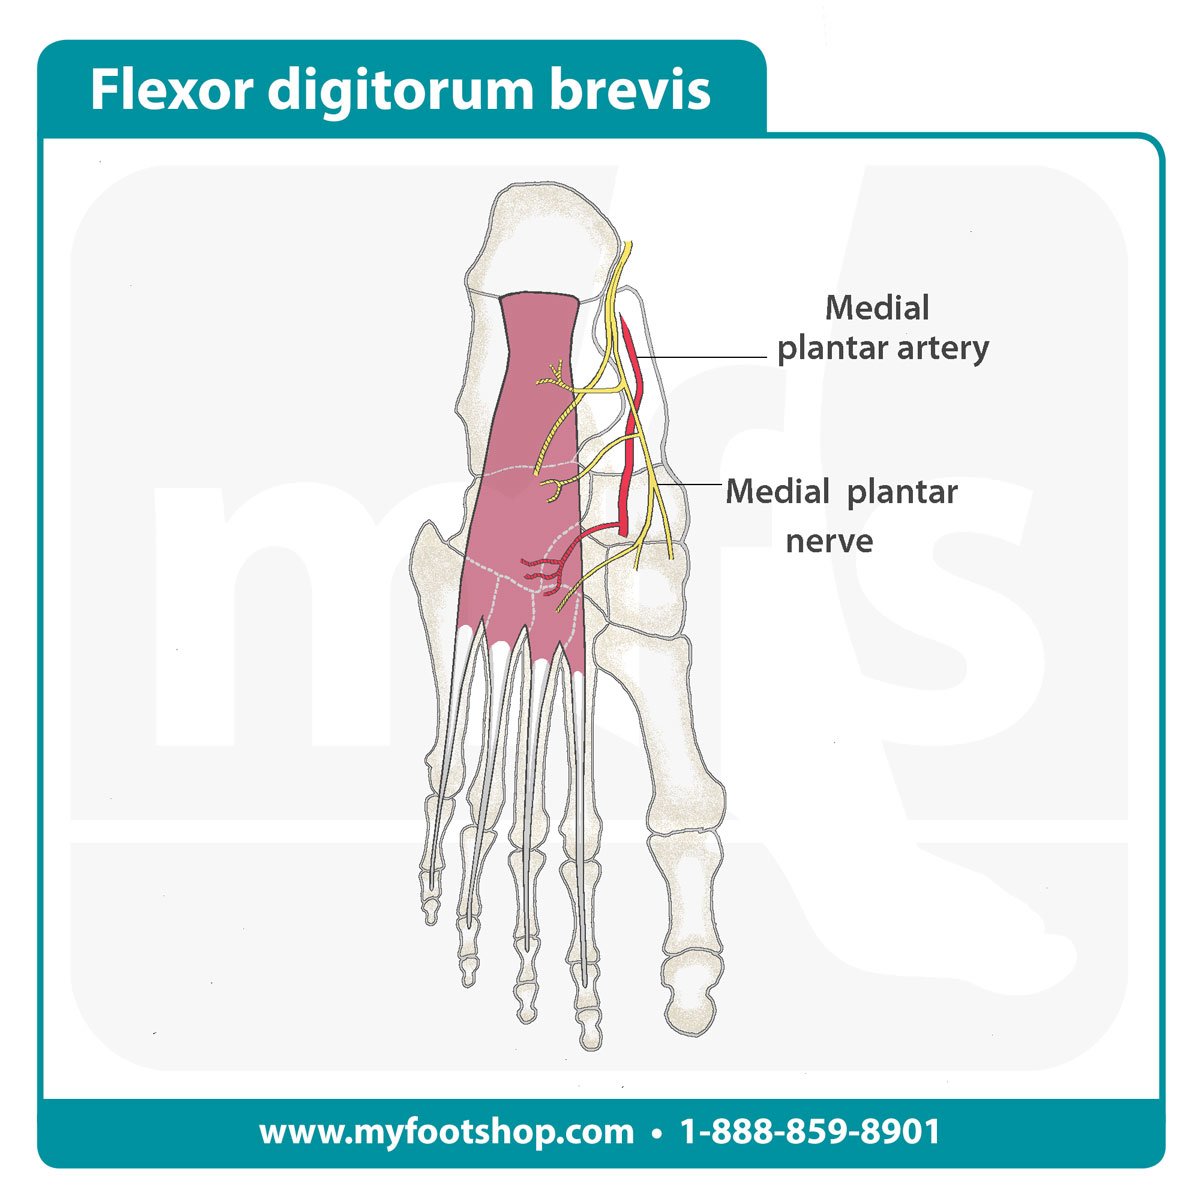 Image of the flexor digitorum brevis muscle and tendon